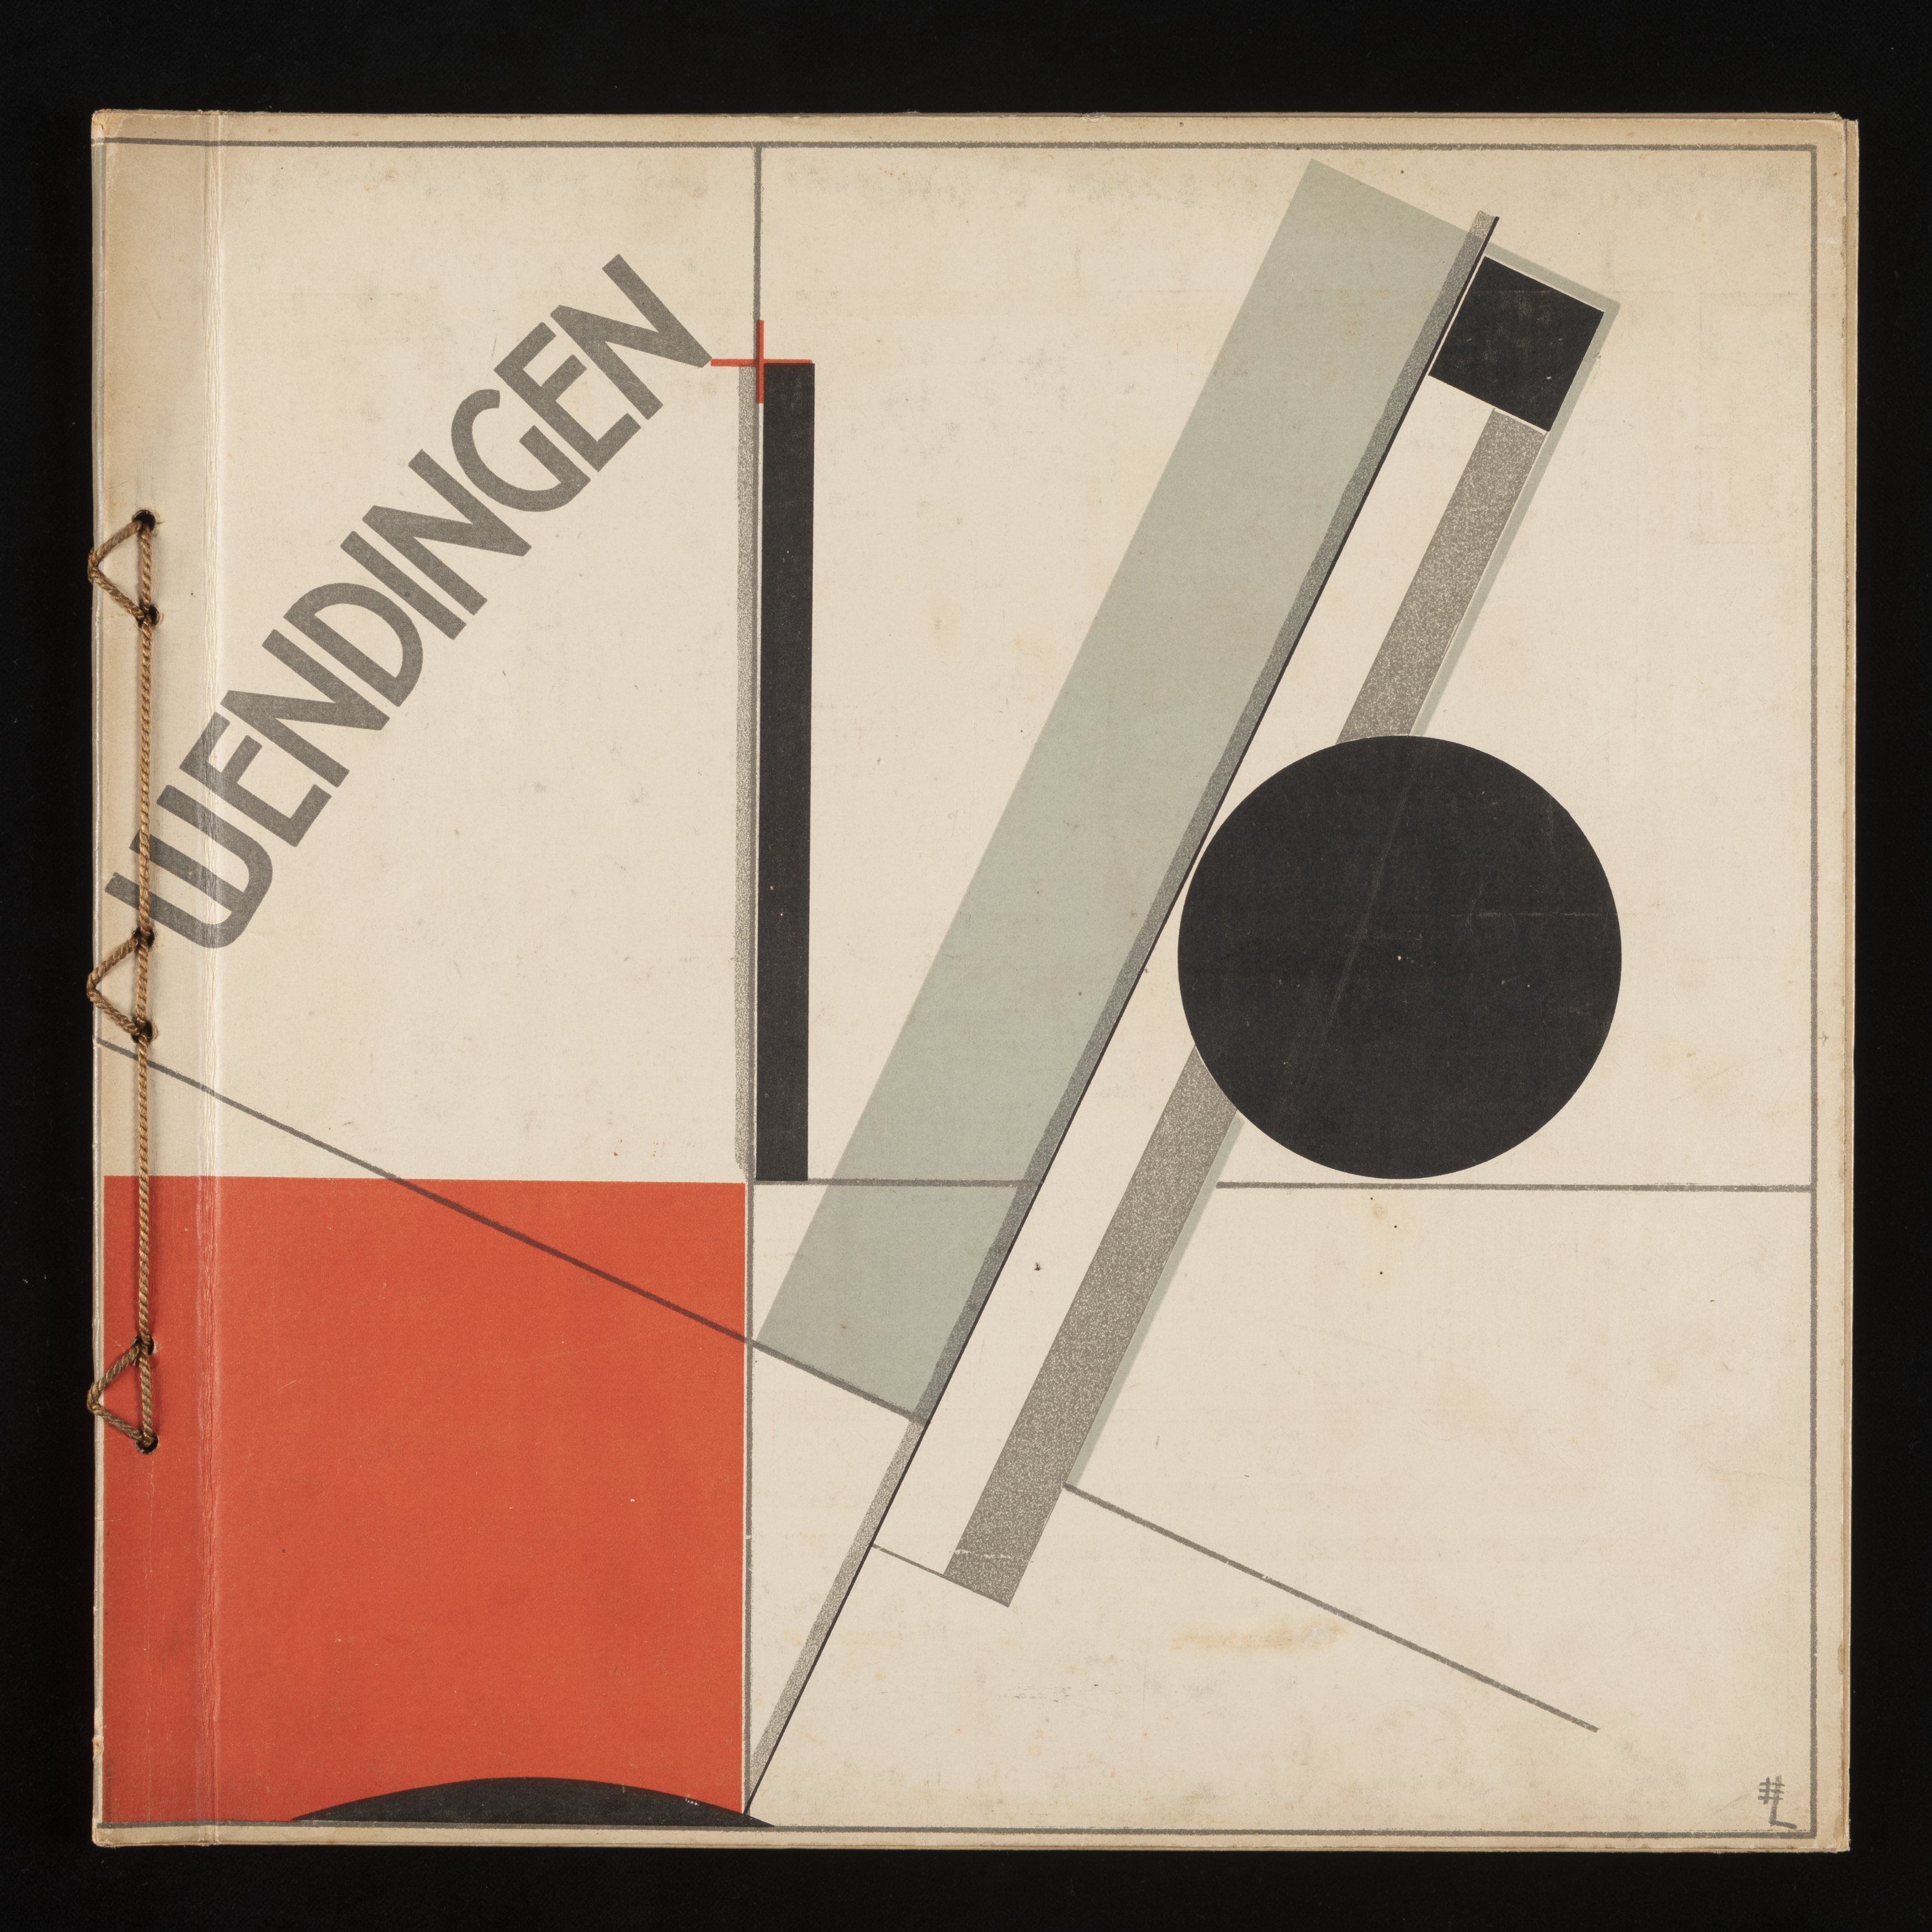 Square-format magazine cover in white printed with geometrical shapes and lines in black, red and grey. Top left section features the word WENDINGEN in grey positioned diagonally.